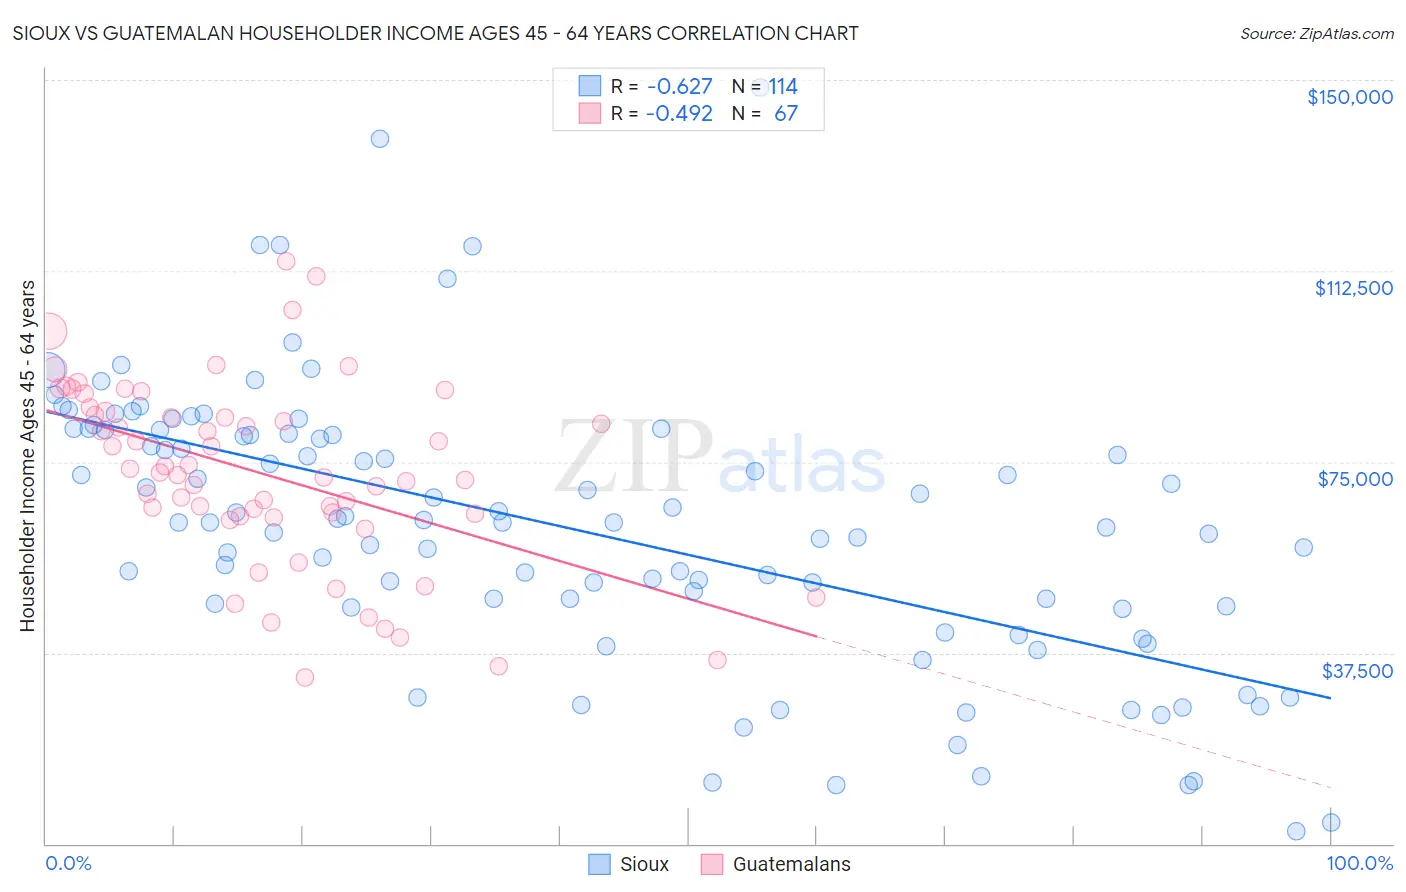 Sioux vs Guatemalan Householder Income Ages 45 - 64 years